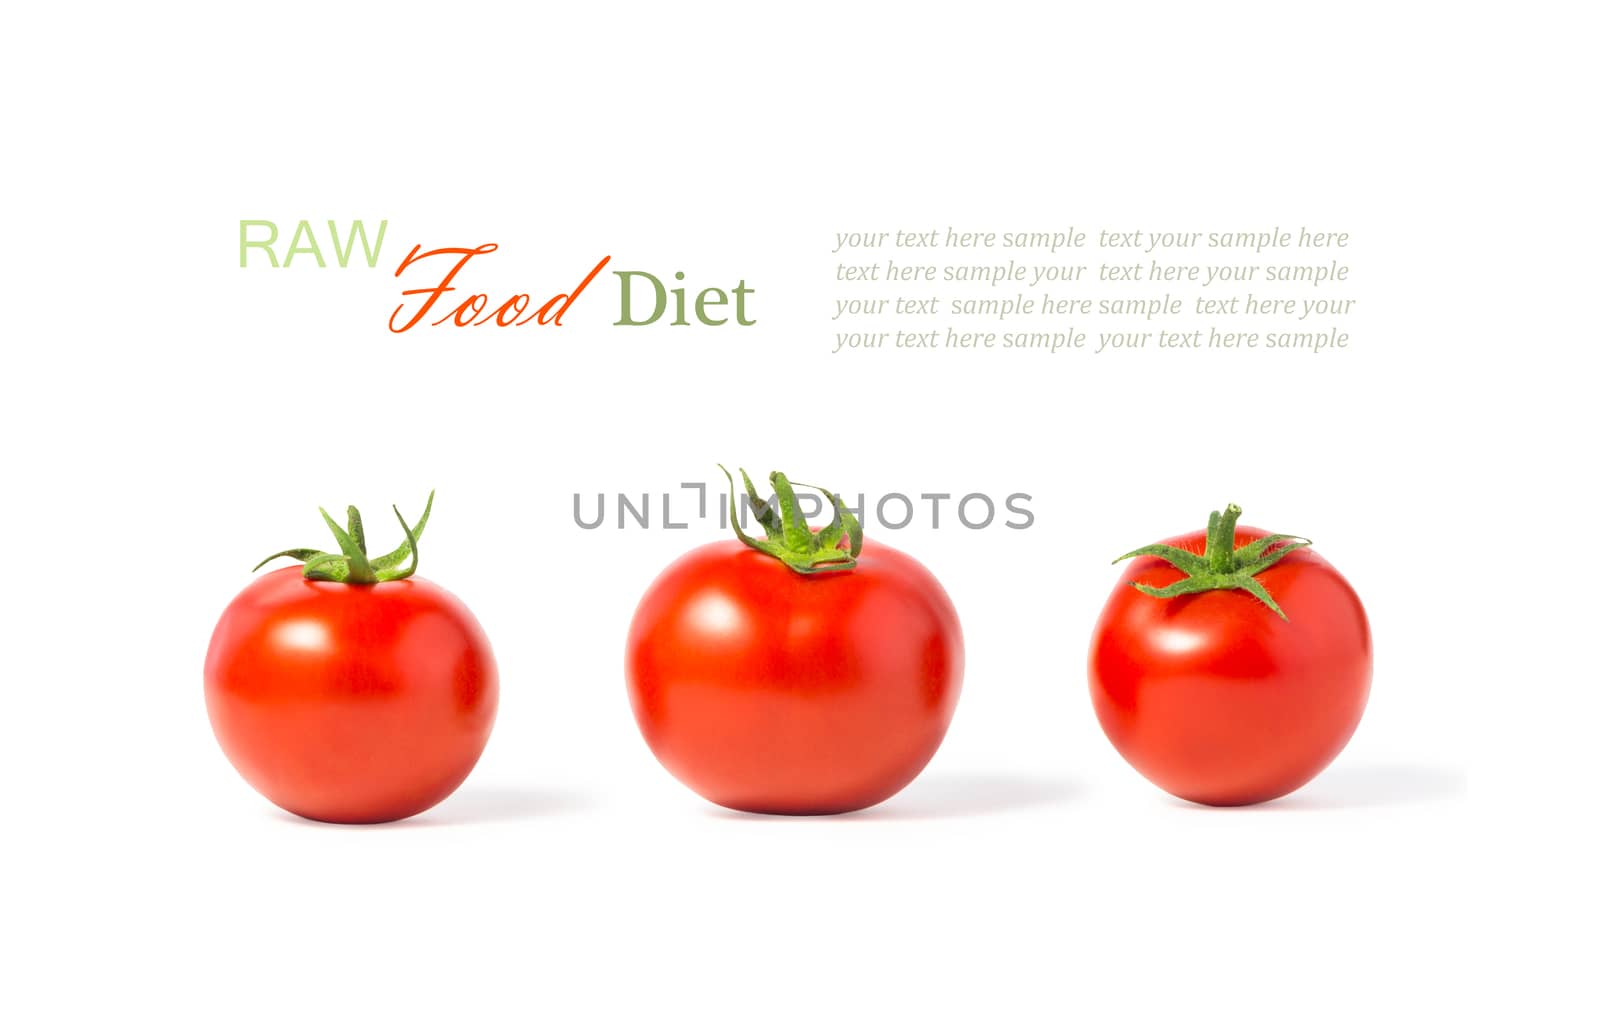 The concept of a raw food diet, healthy eating, the benefits of fresh vegetables. Three ripe juicy raw tomatoes isolated on white background.